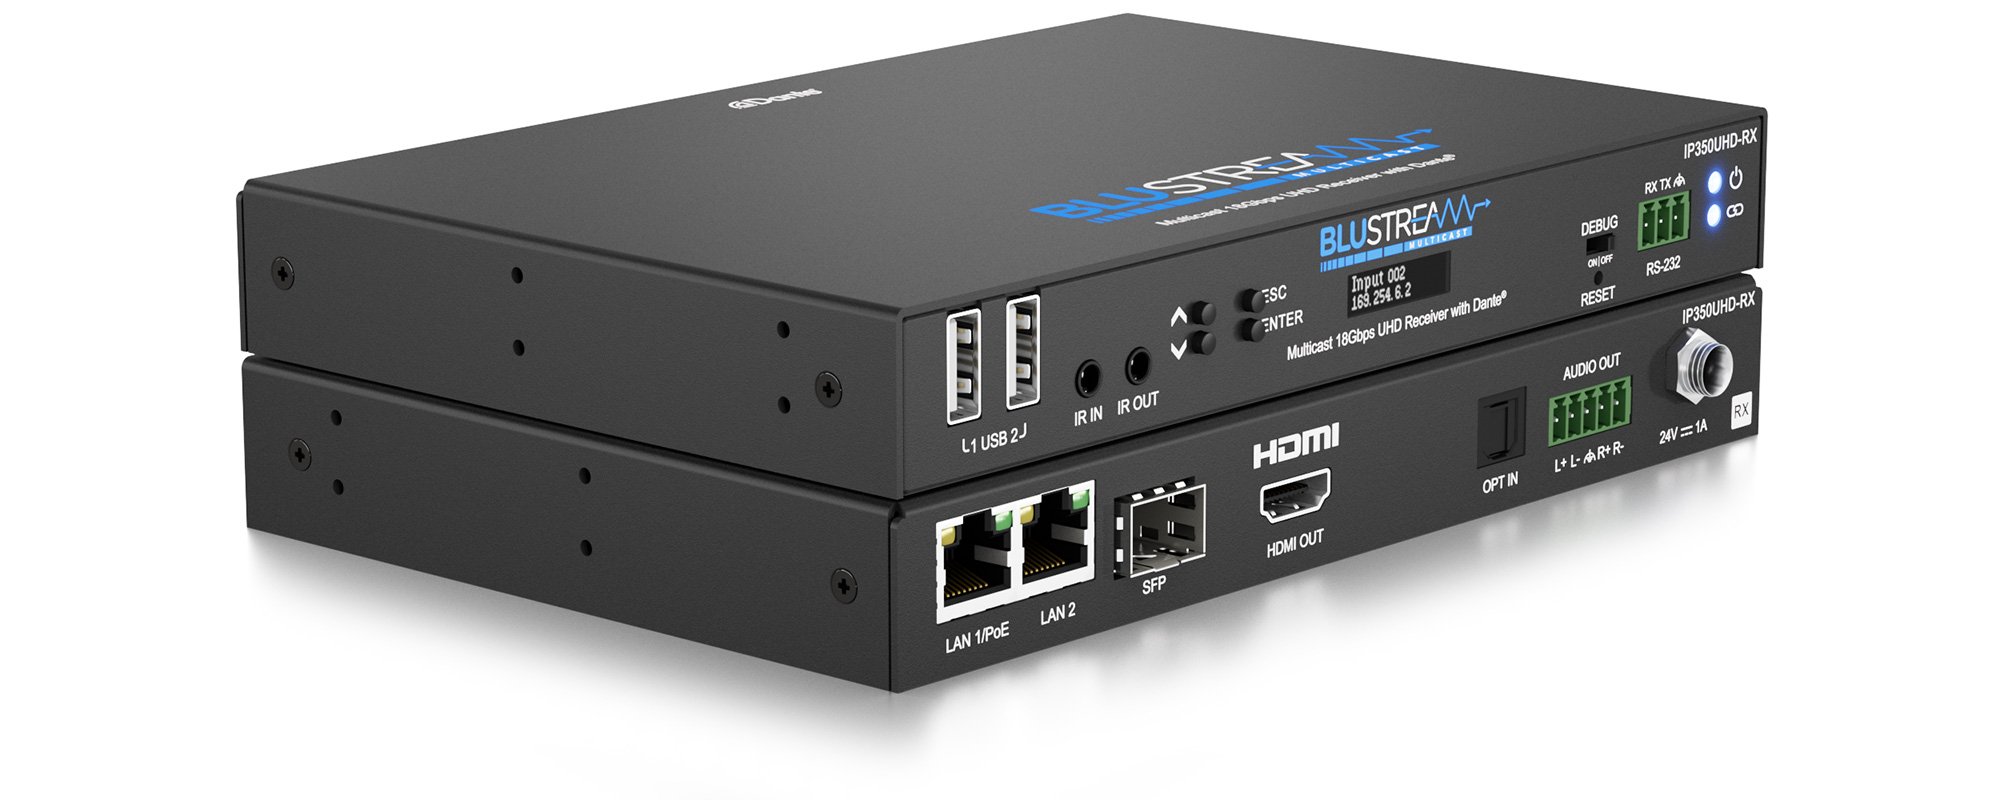 Blustream IP 18Gbps Multicast UHD Video Receiver over 1Gb Network